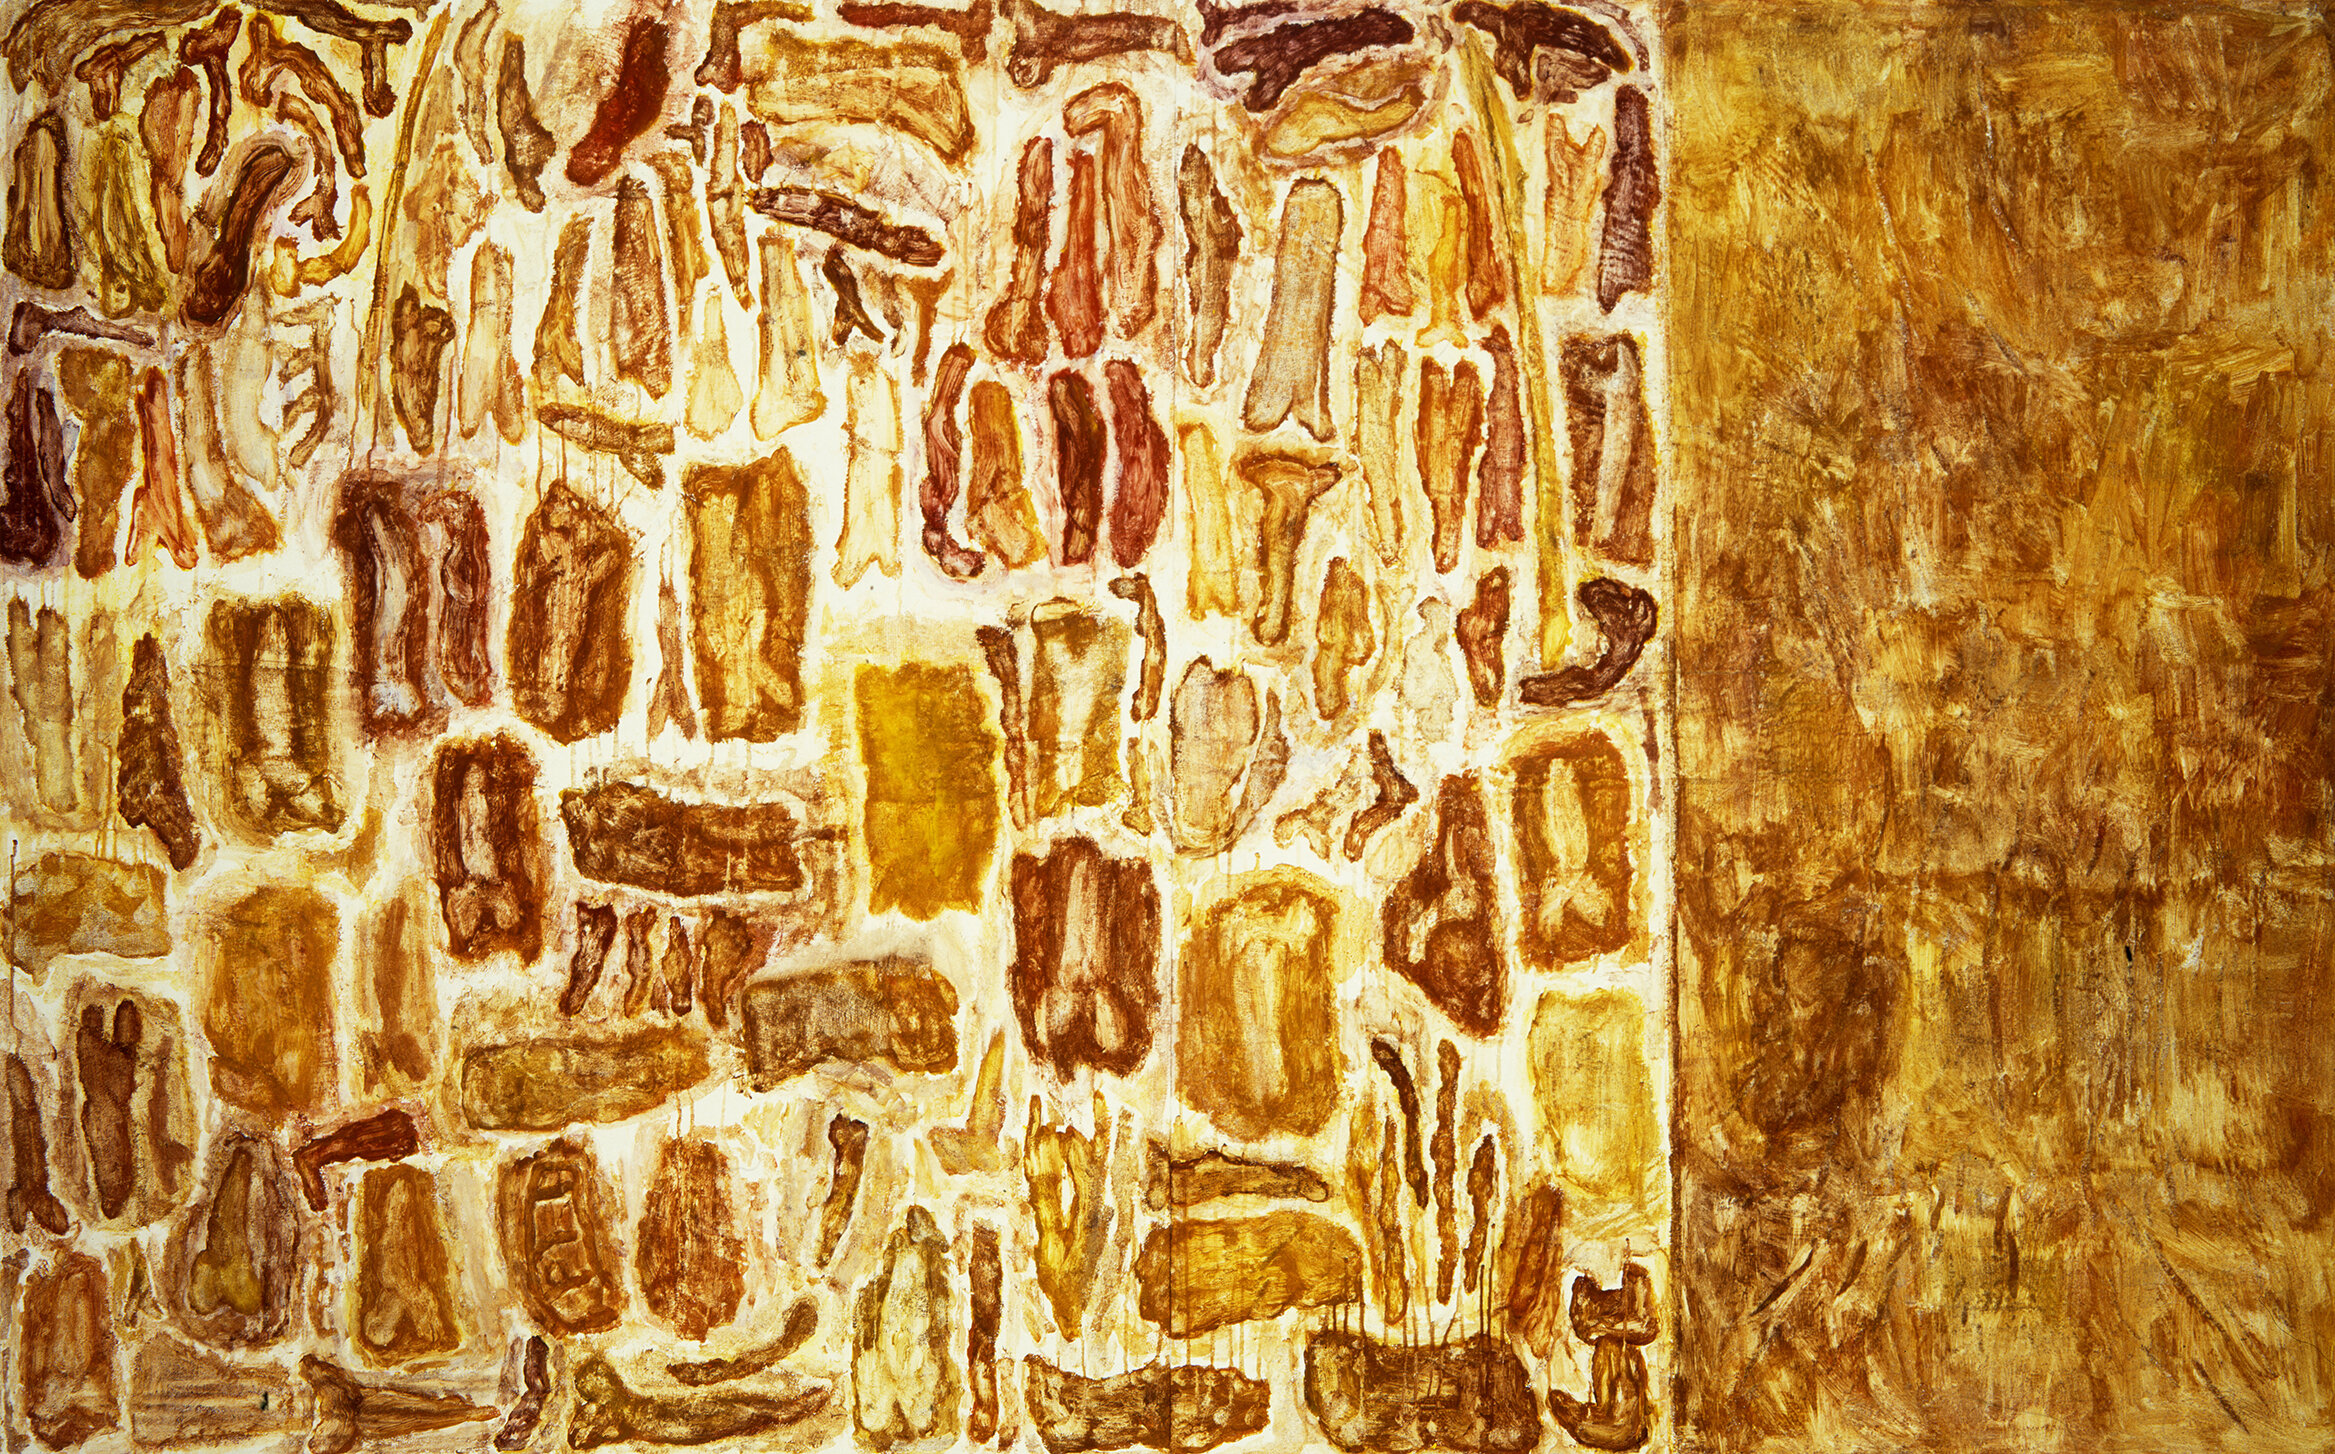   Toward the Corporeal , 1986, acrylic, cast gesso and gaze on canvas, 48 x 120 inches 